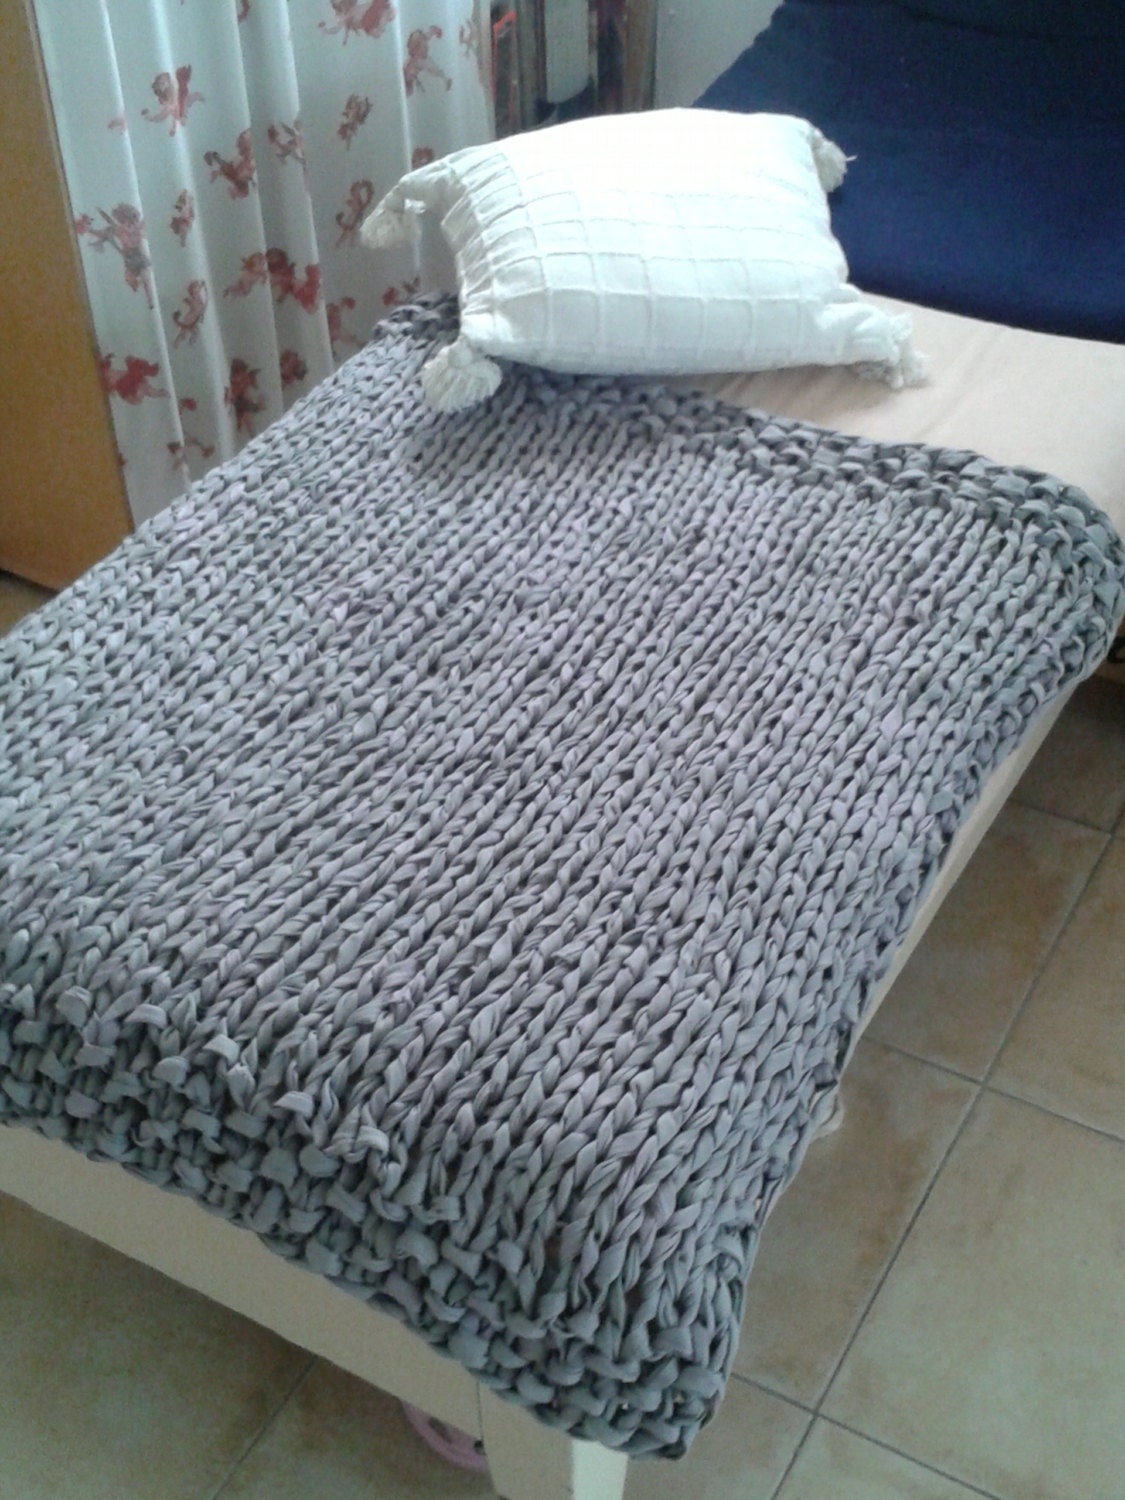 Hand knitted bed cover/rug made from recycled tricot yarn OOAK